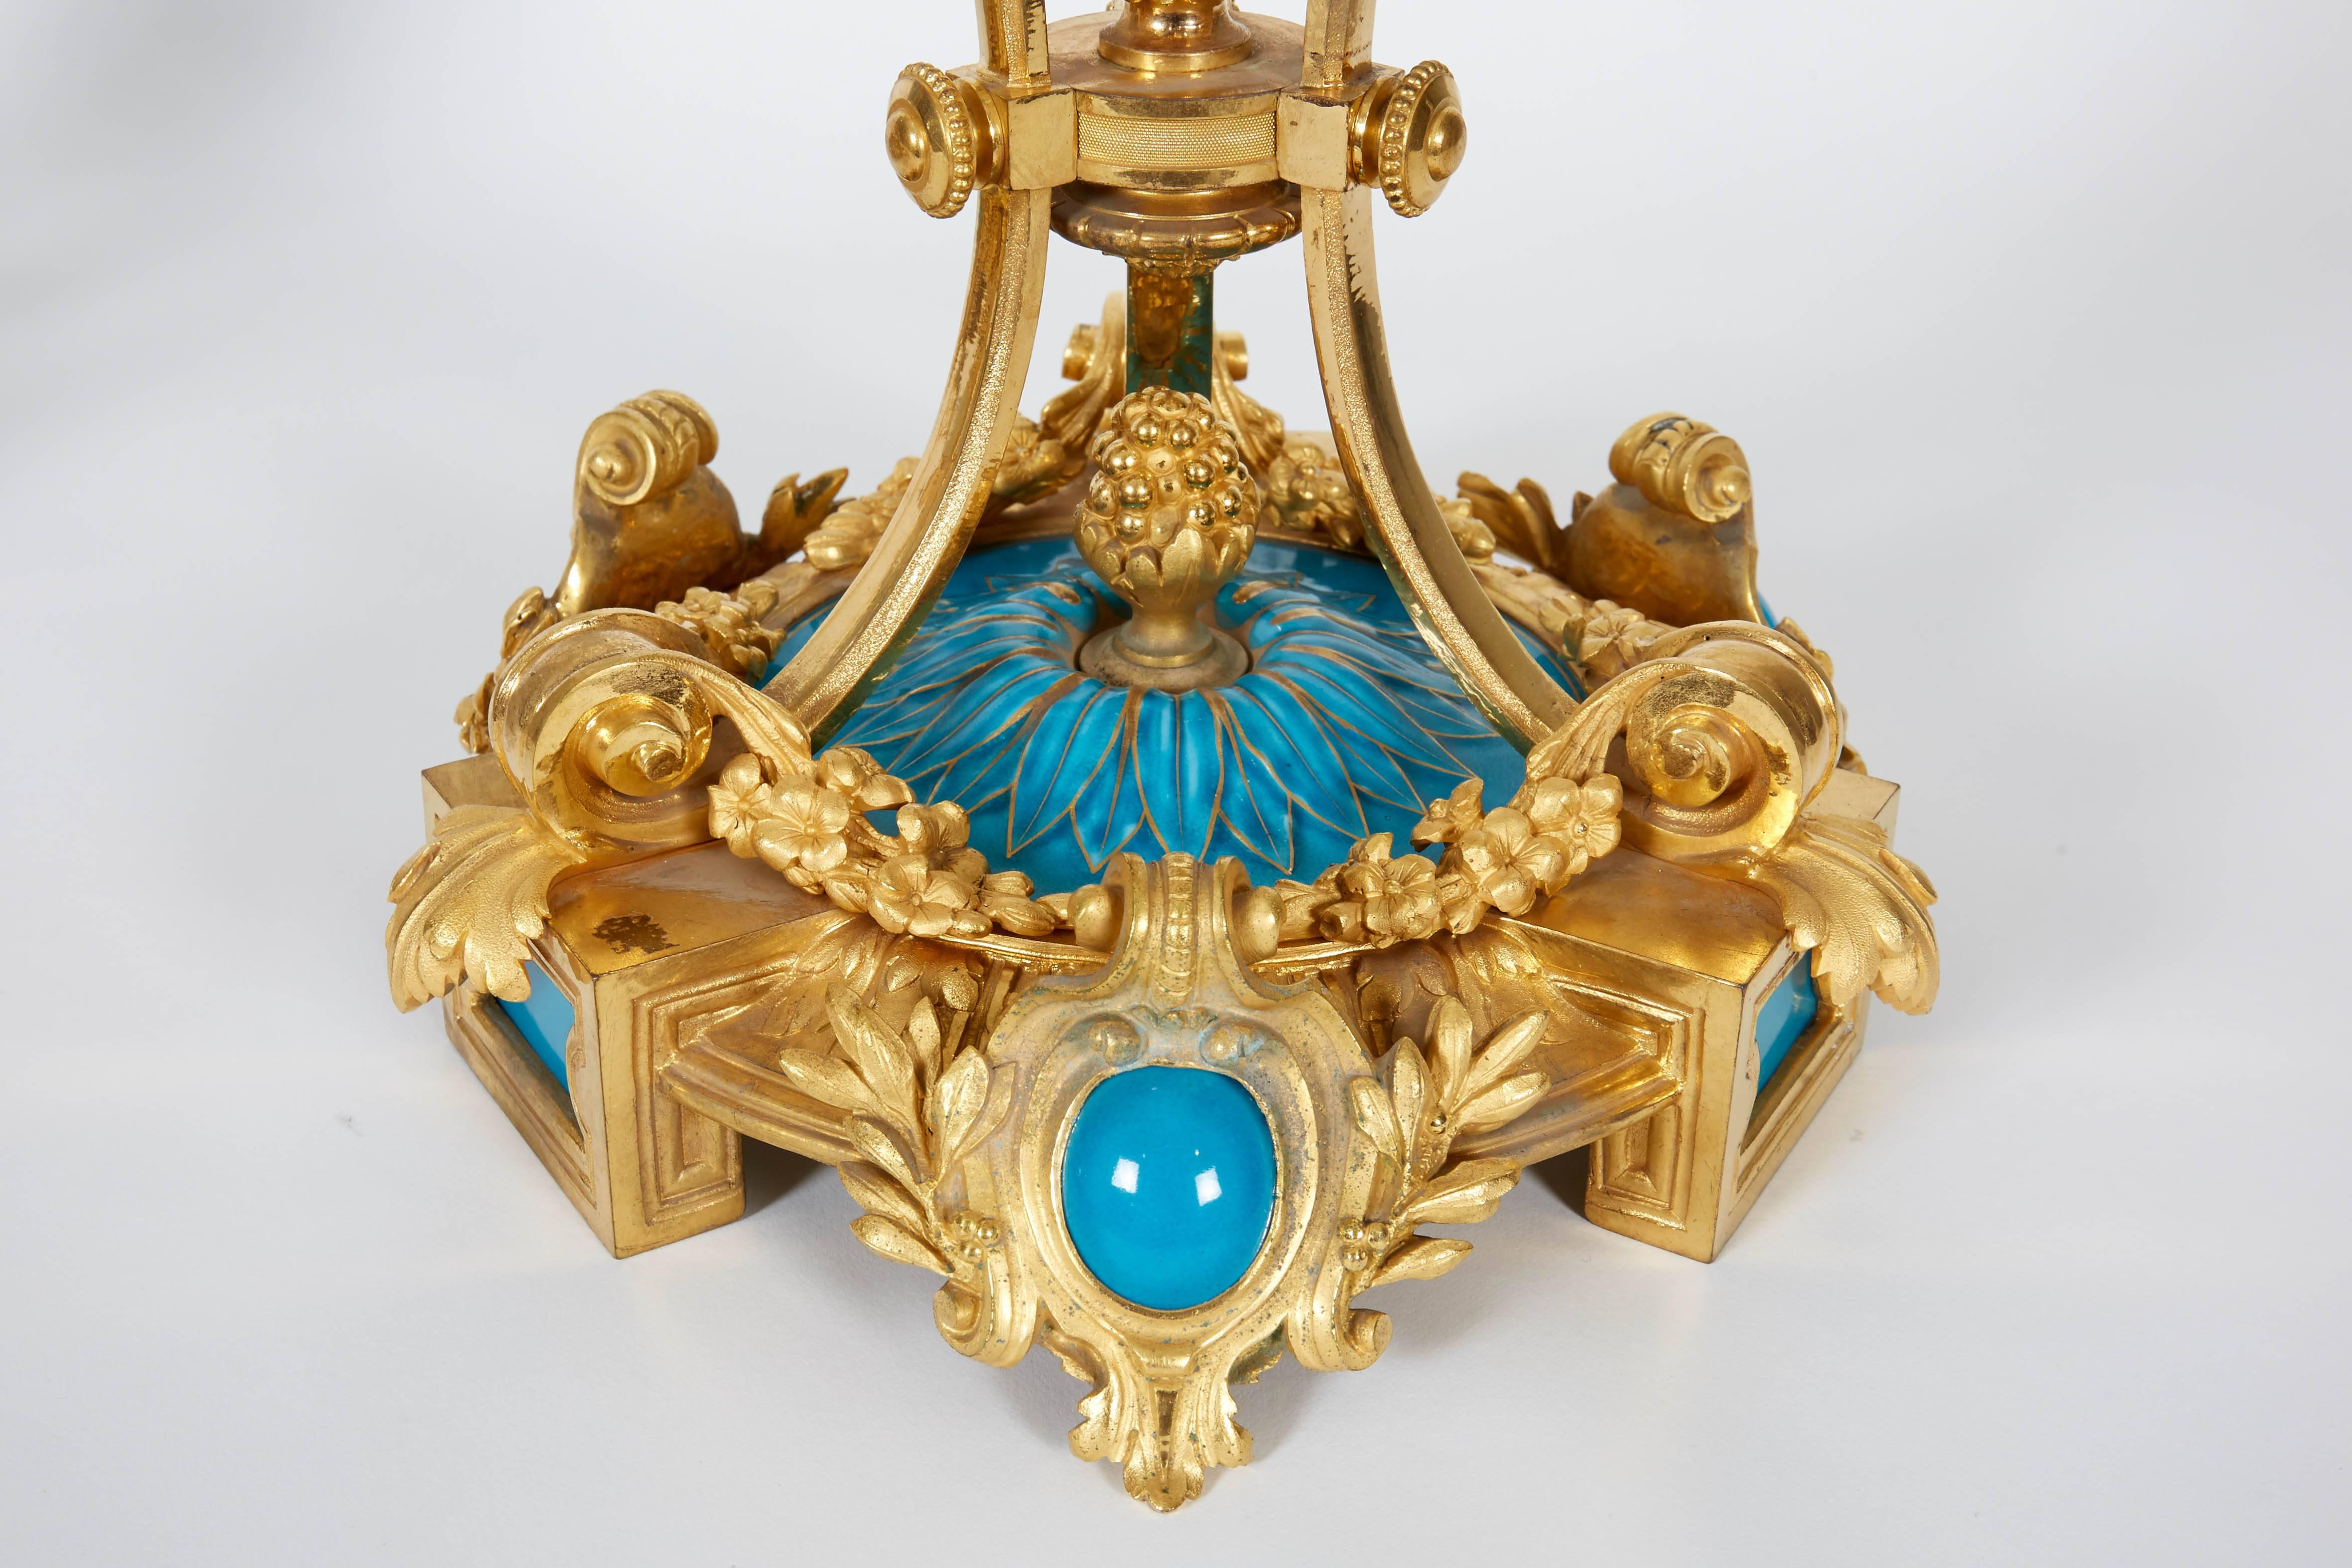 Exquisite Pair of French Ormolu and Turquoise Sevres Porcelain Candelabra 1